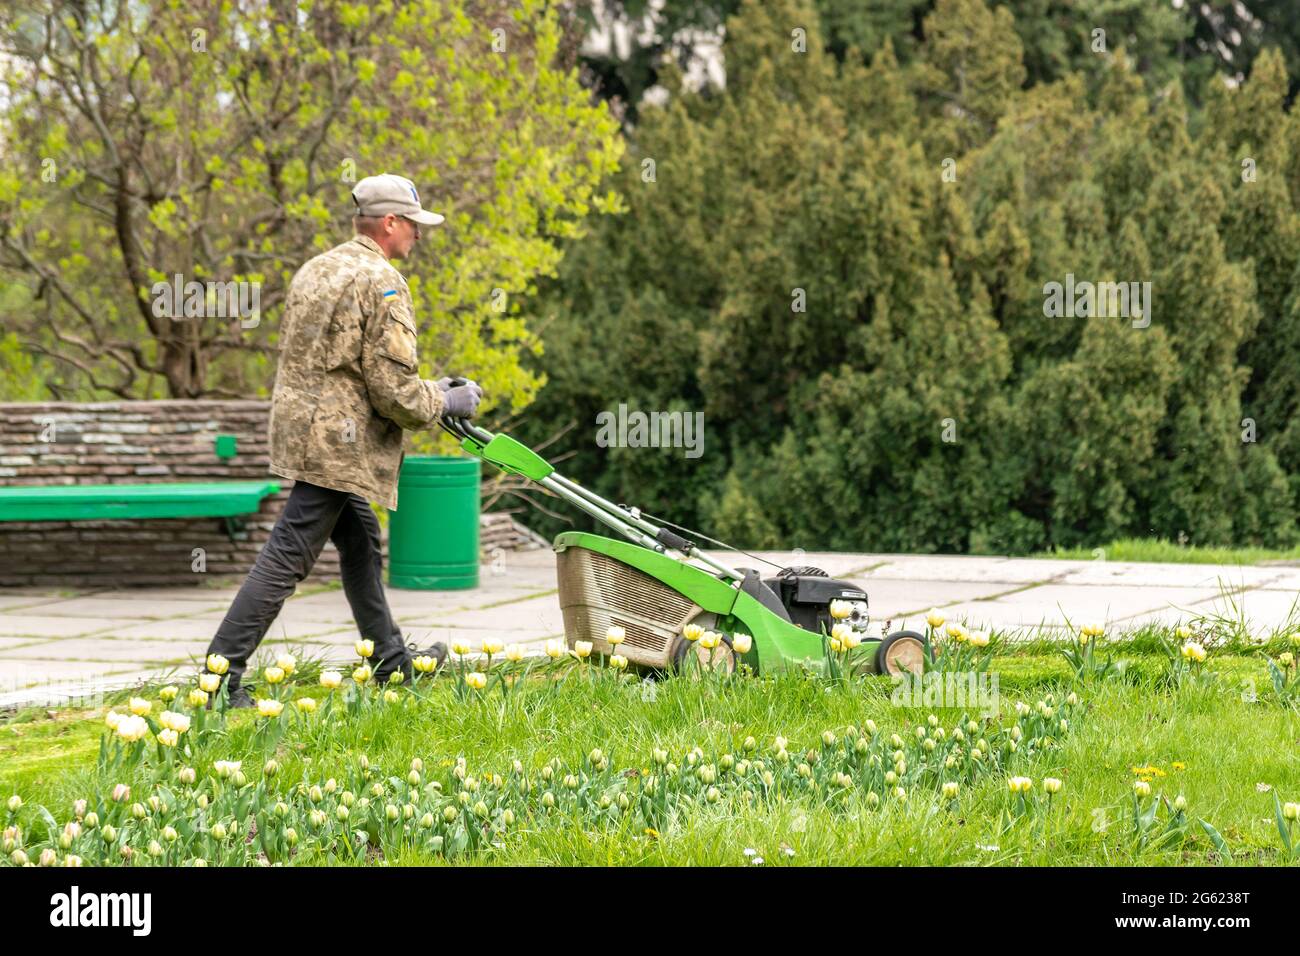 Kiev, Ukraine - April 27, 2021: A man with a lawn mower mows the grass in the park. Stock Photo